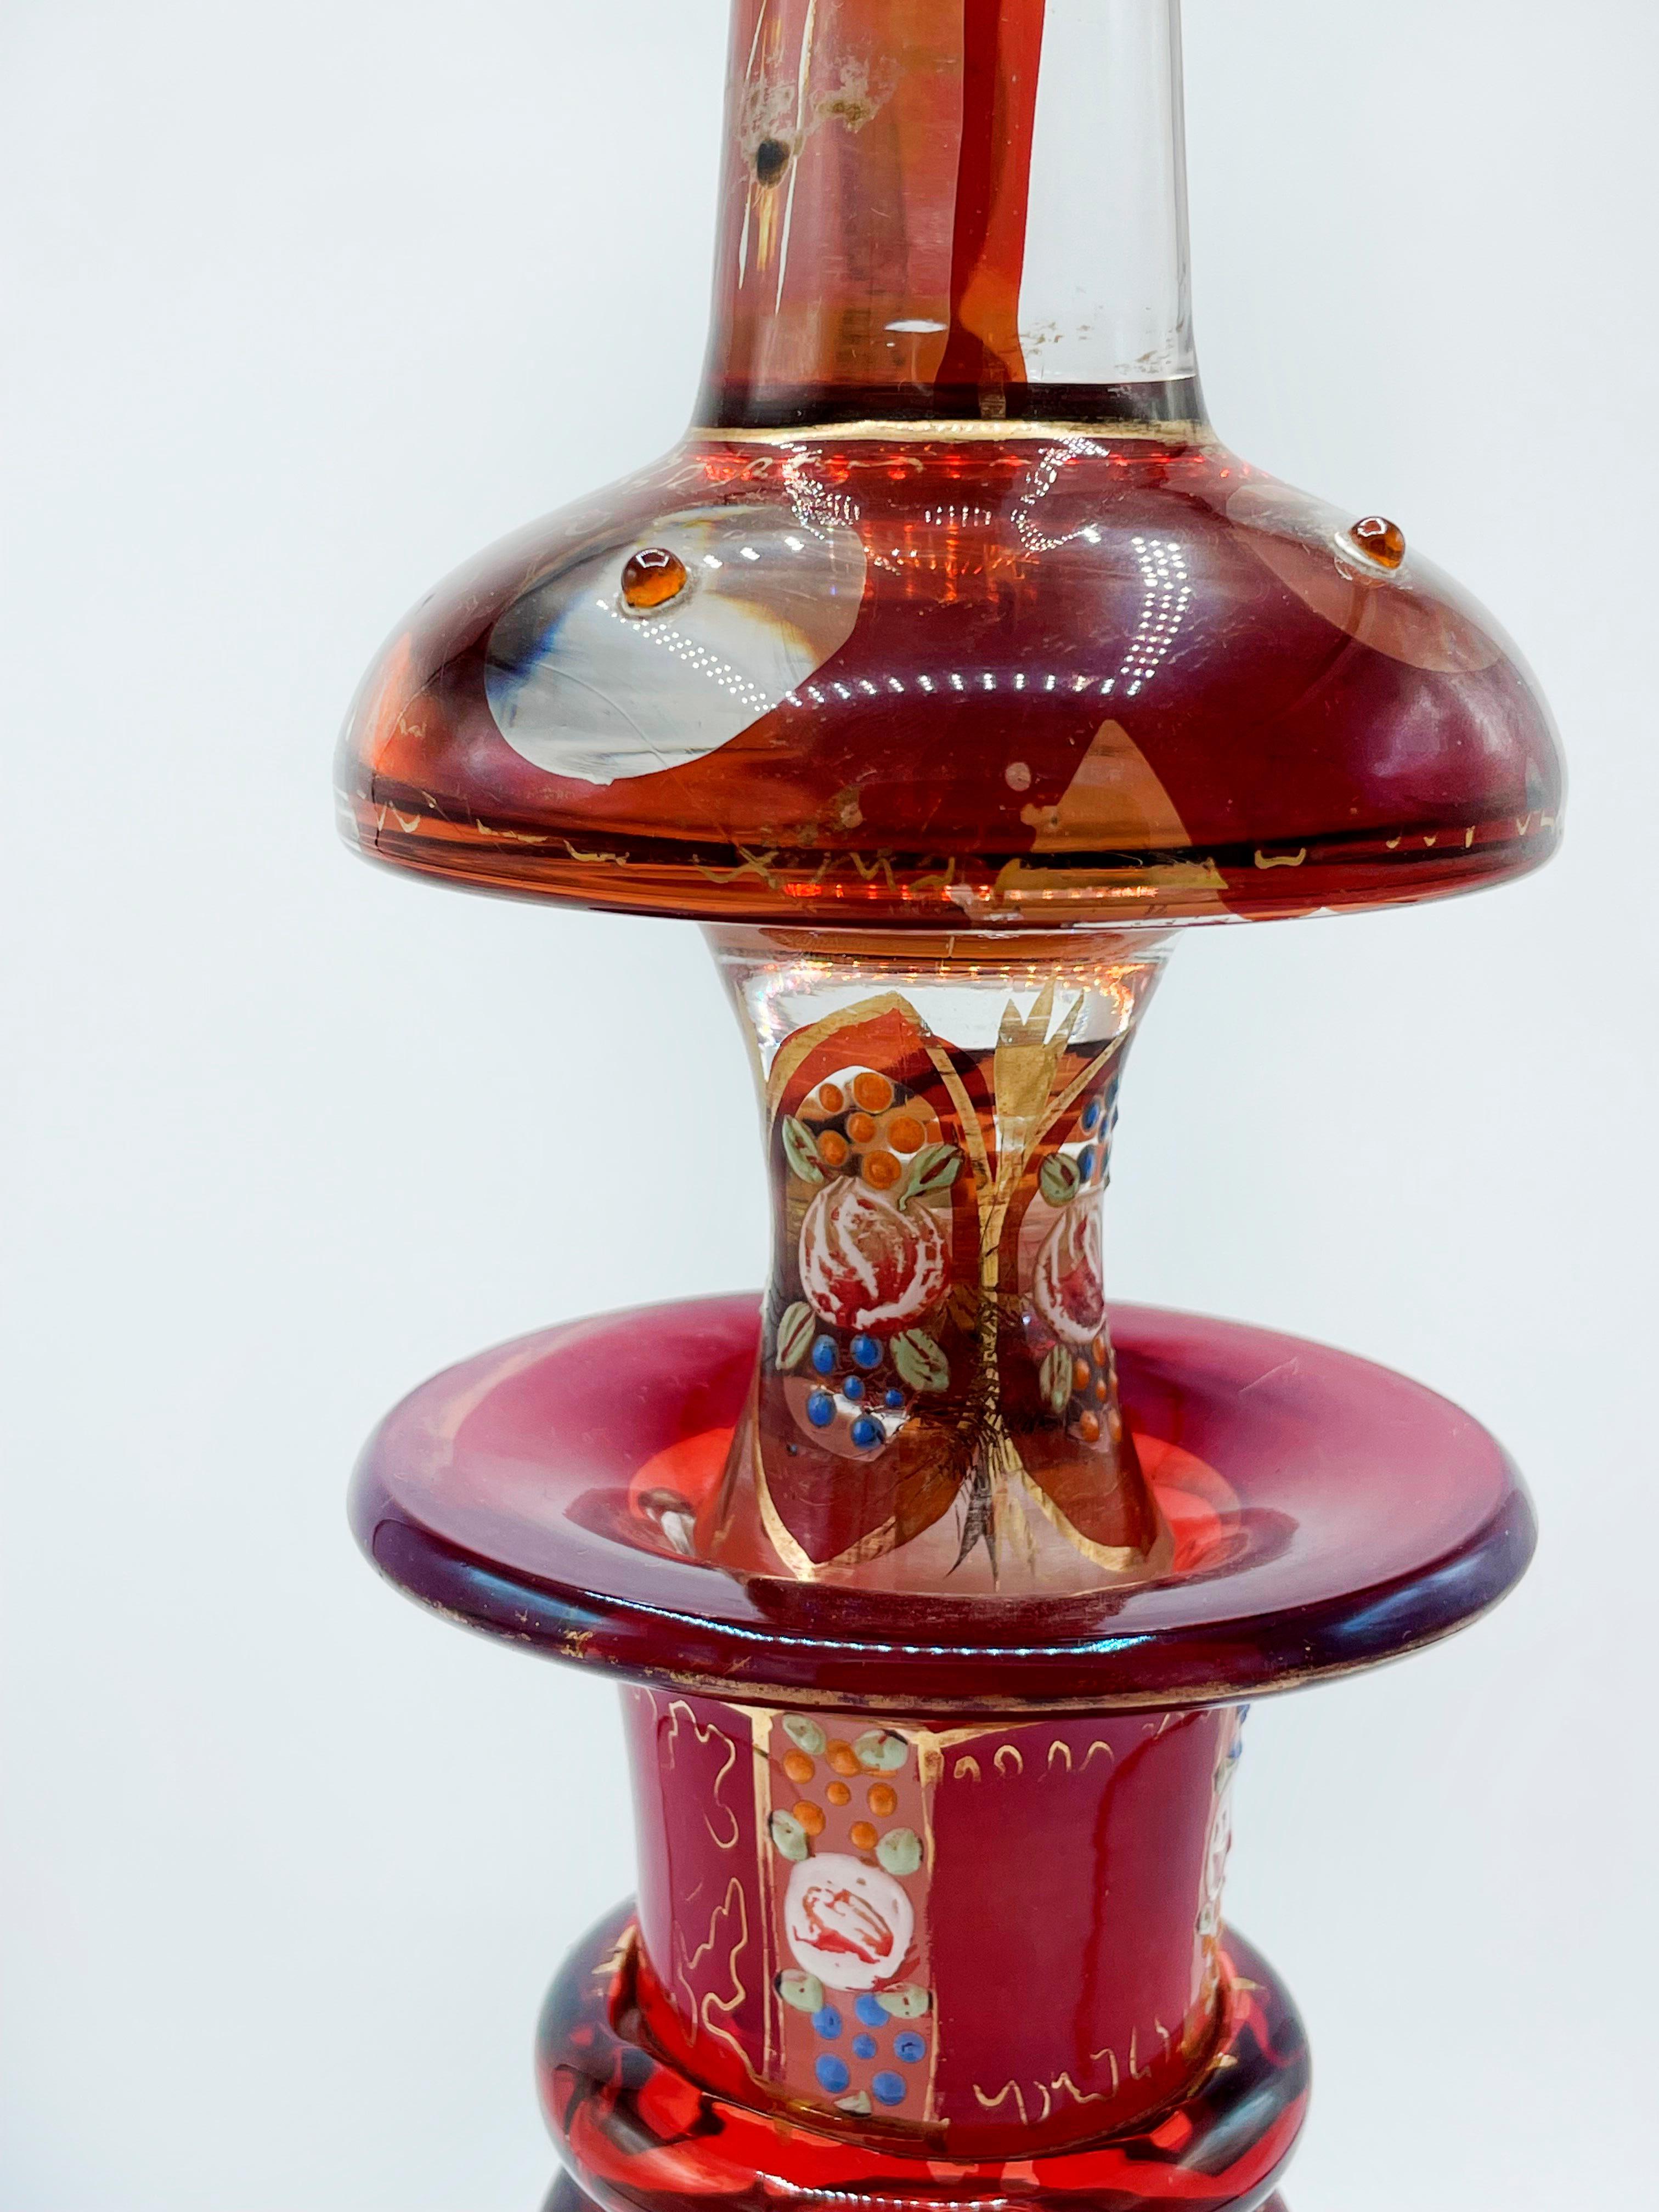 Large Bohemian in crystal, Enamelled and Cut Red Overlay Glass

Measures:
57 centimeters high
 16 centimeters diameter

This beautiful decanter was created in Bohemia (modern-day Czech Republic), a region which was famous for its decorative